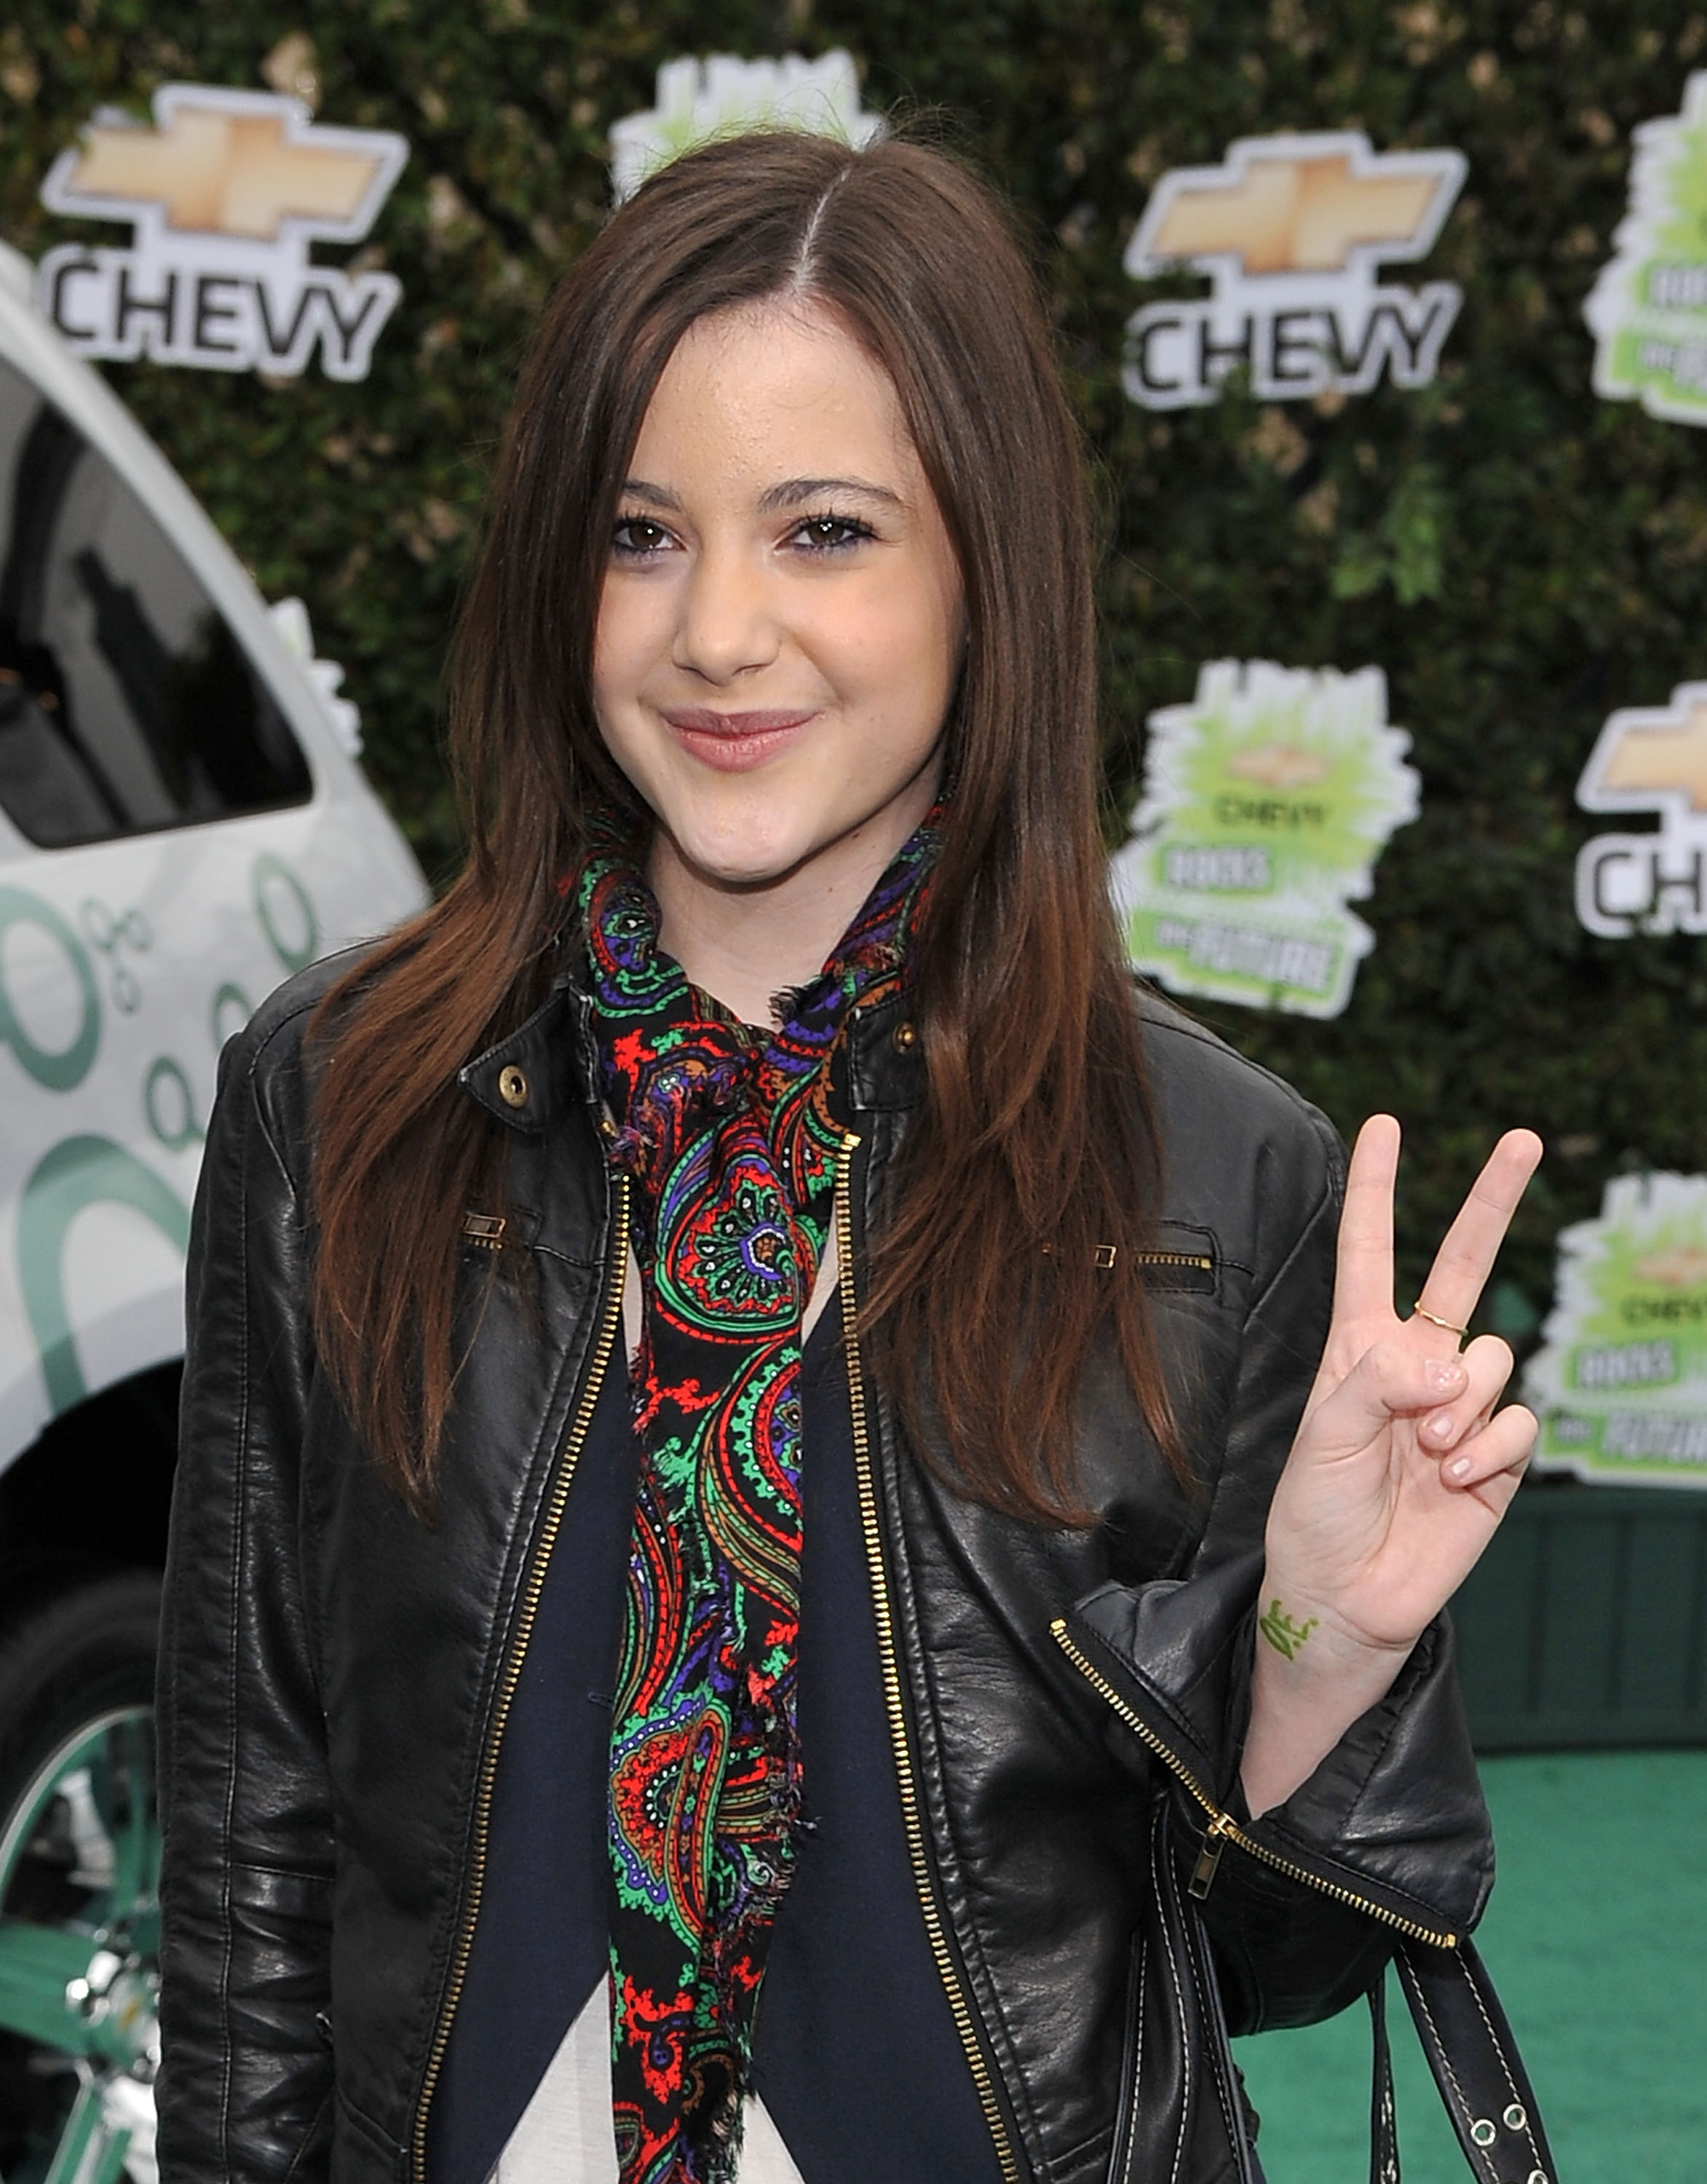 Close-up of Alexa giving the peace sign and wearing a leather jacket